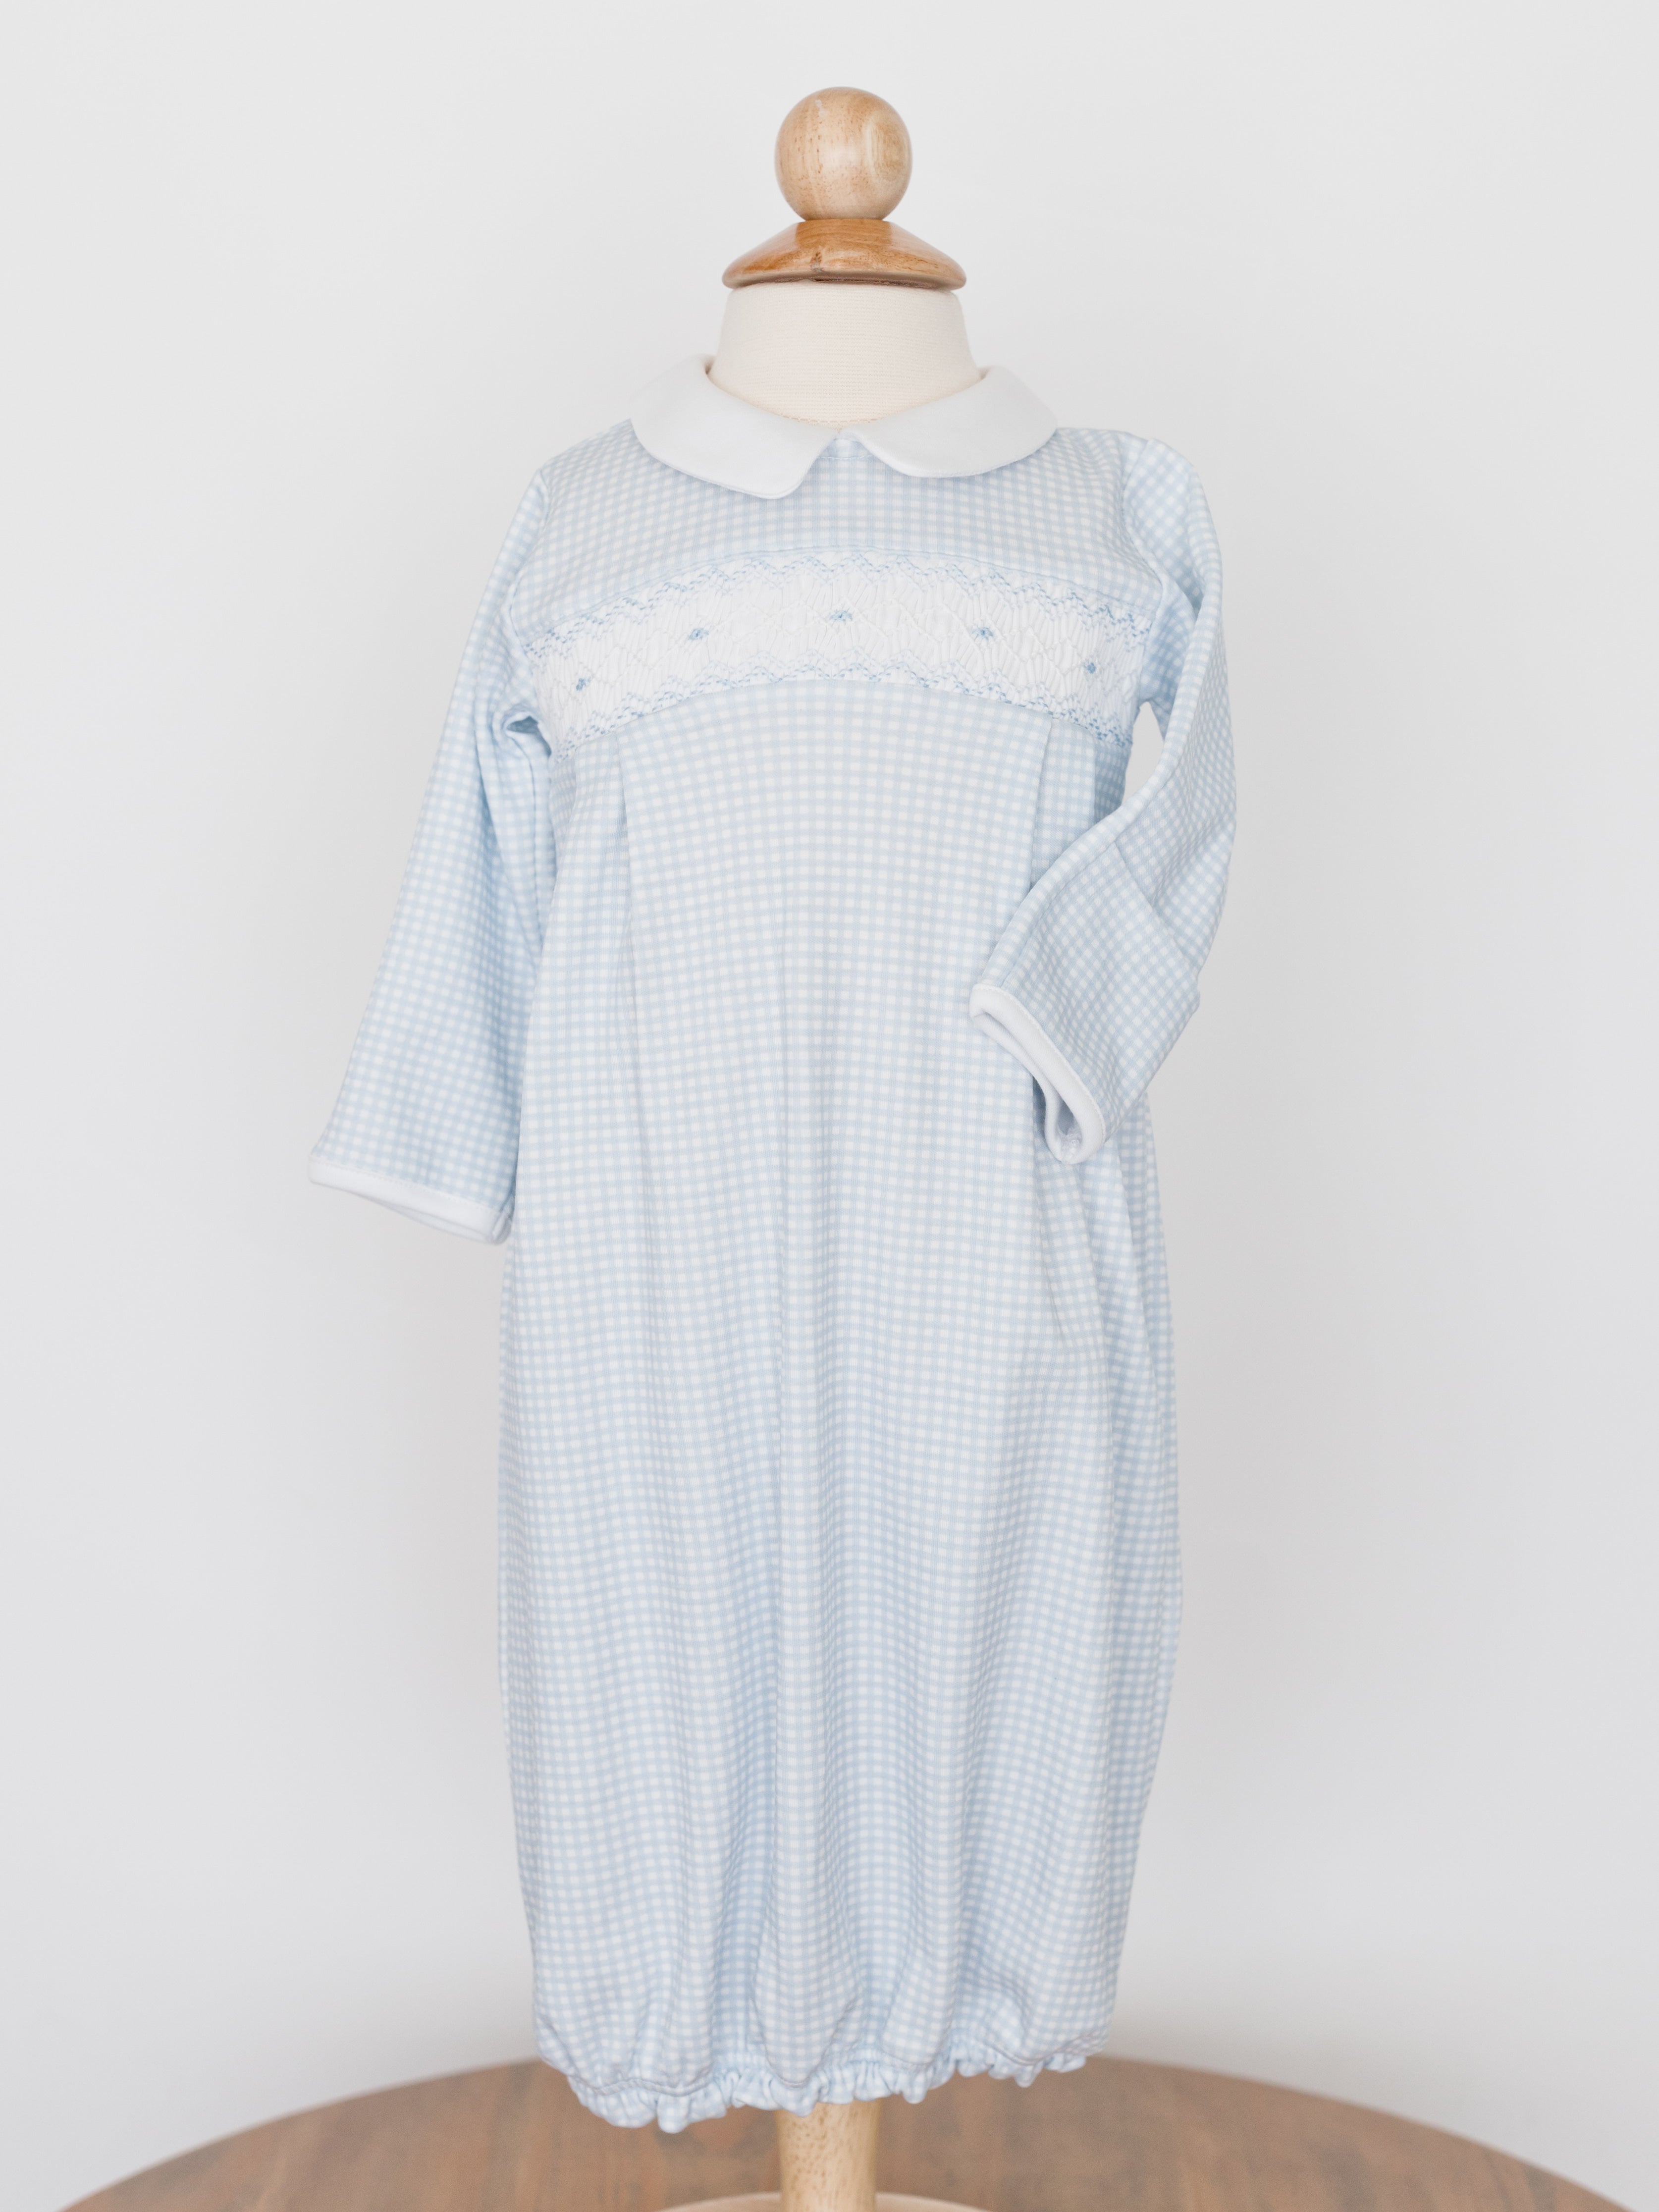 Nella Pima Blue Gingham Baby Gown